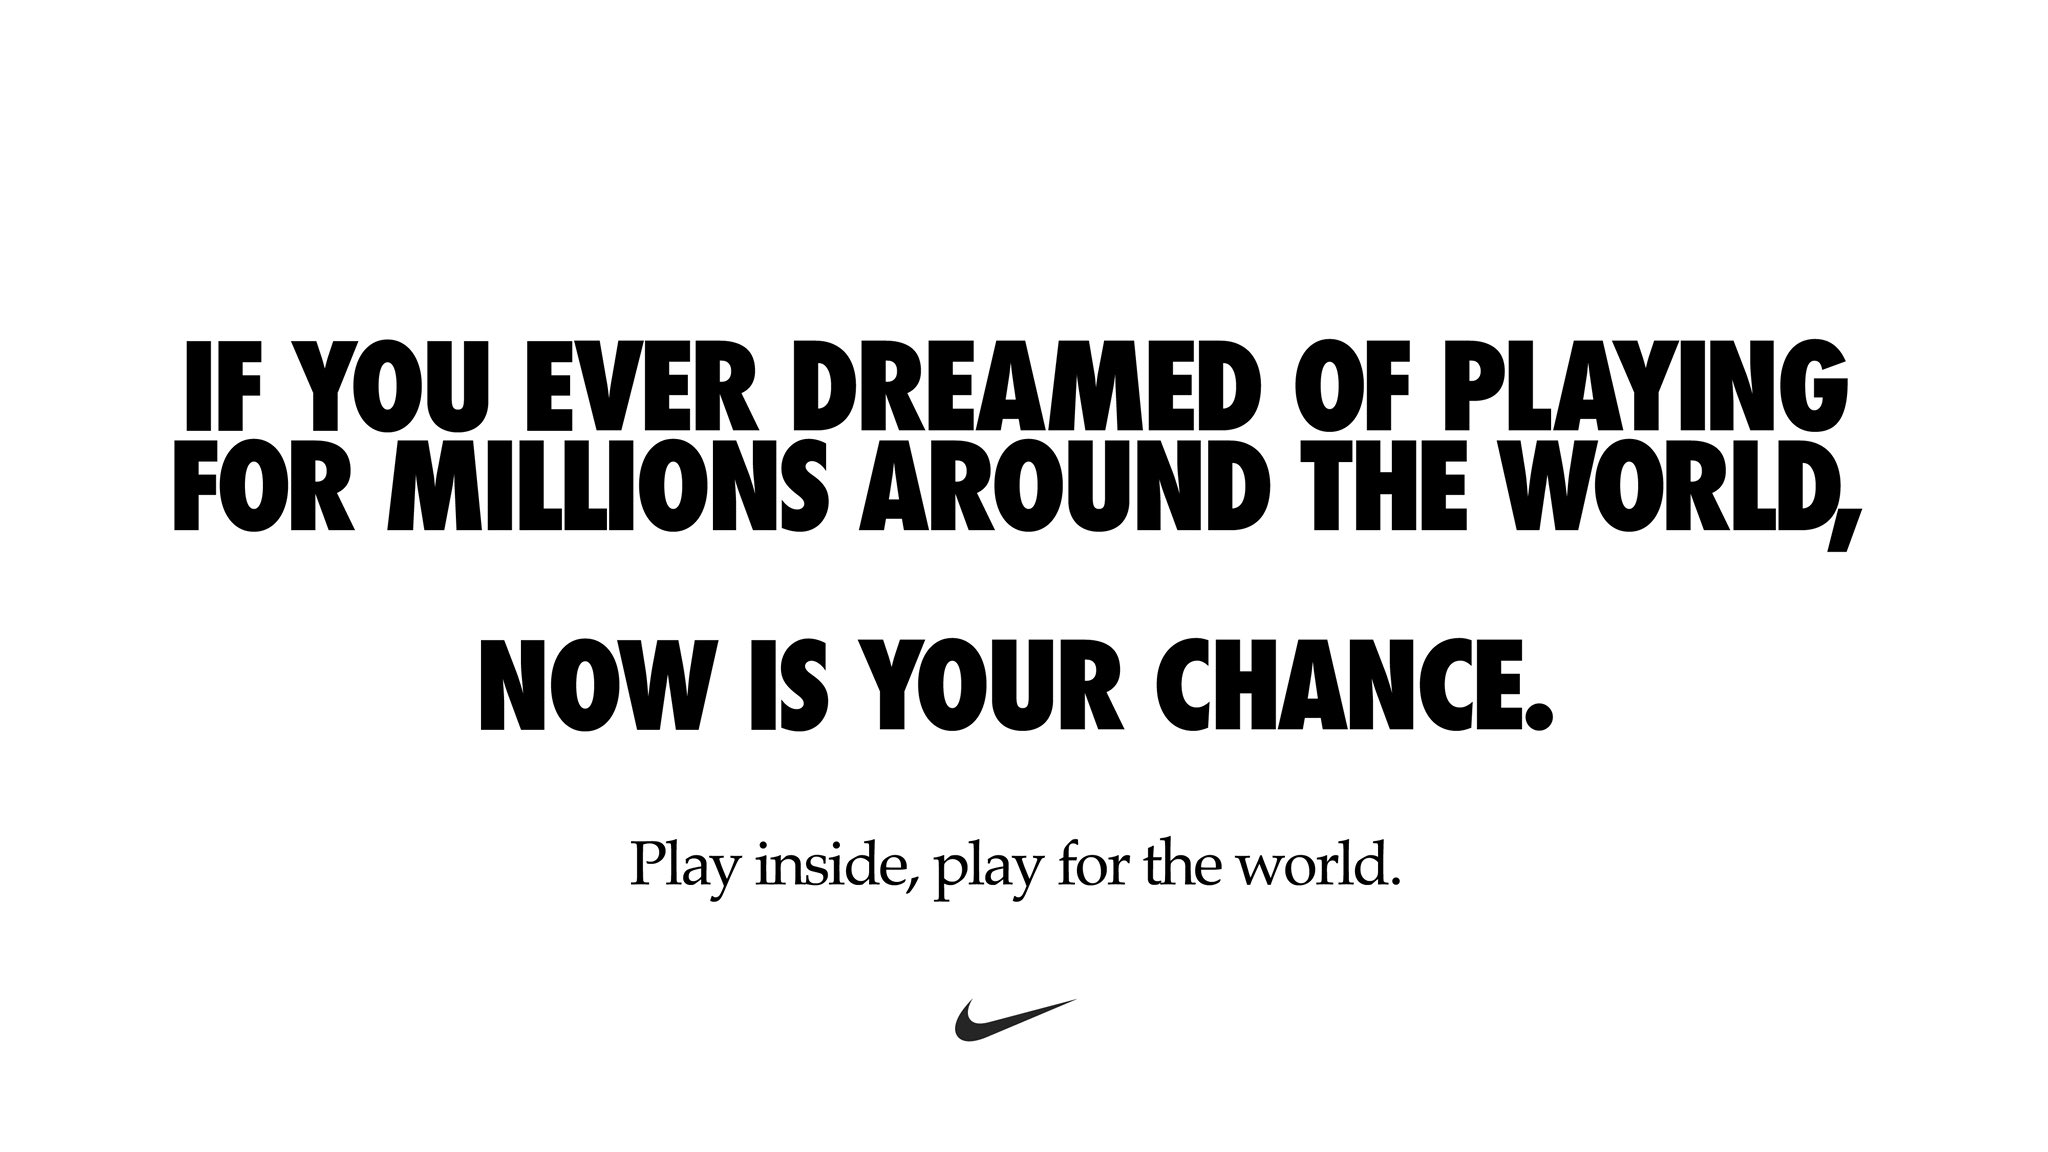 Nike reveals bold new ad (but there's a problem) Creative